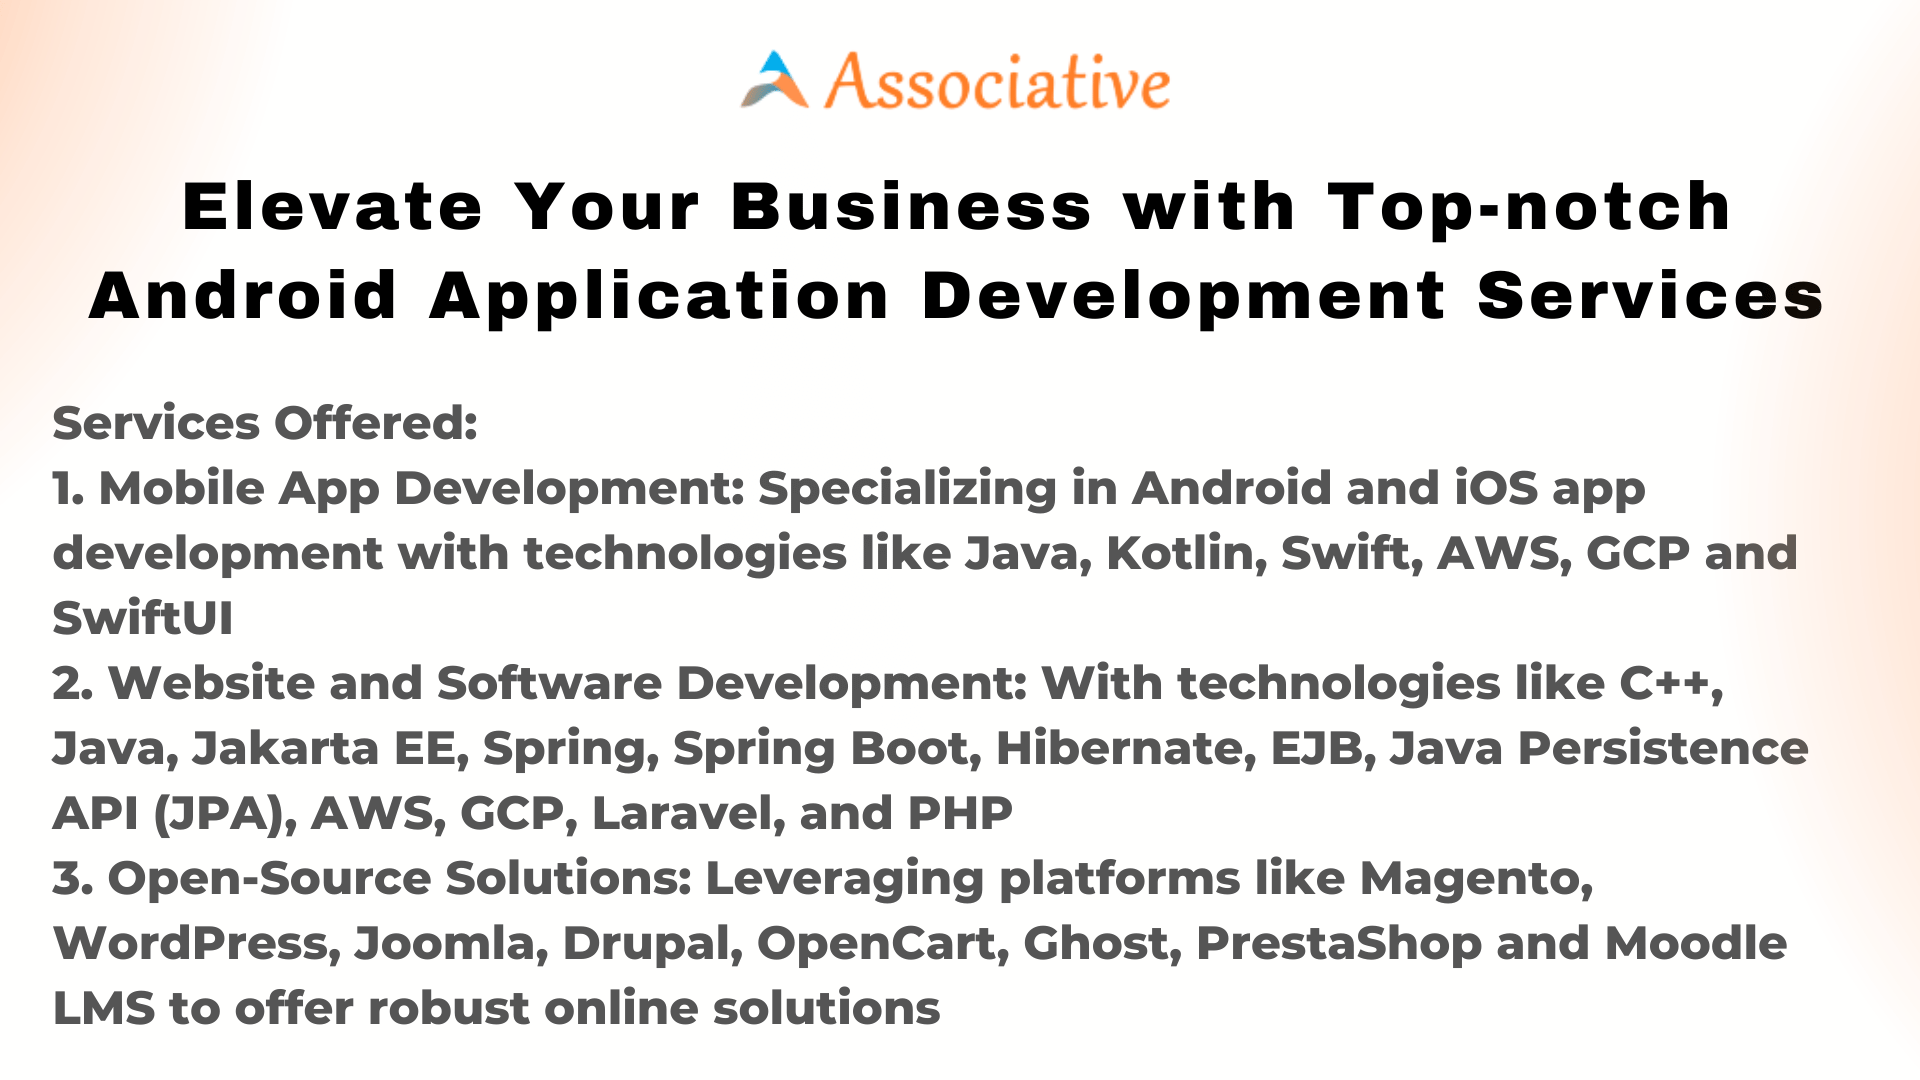 Elevate Your Business with Top-notch Android Application Development Services